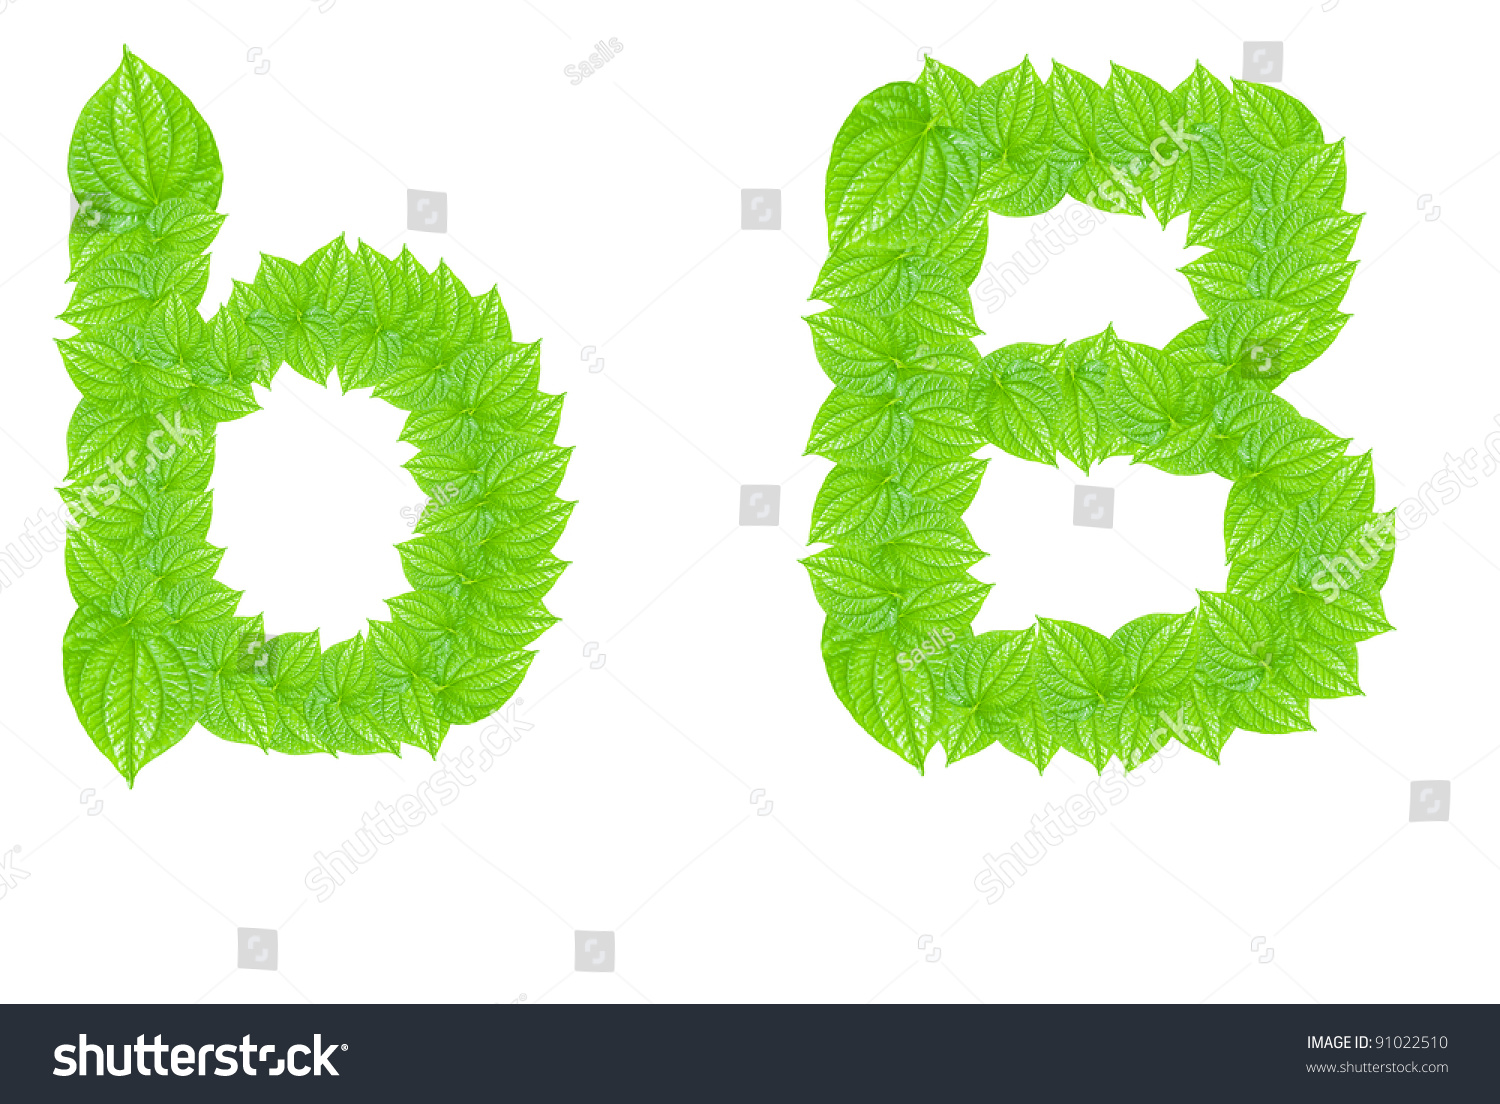 English Alphabet Made From Green Leafs With Letter B In Small Capital ...